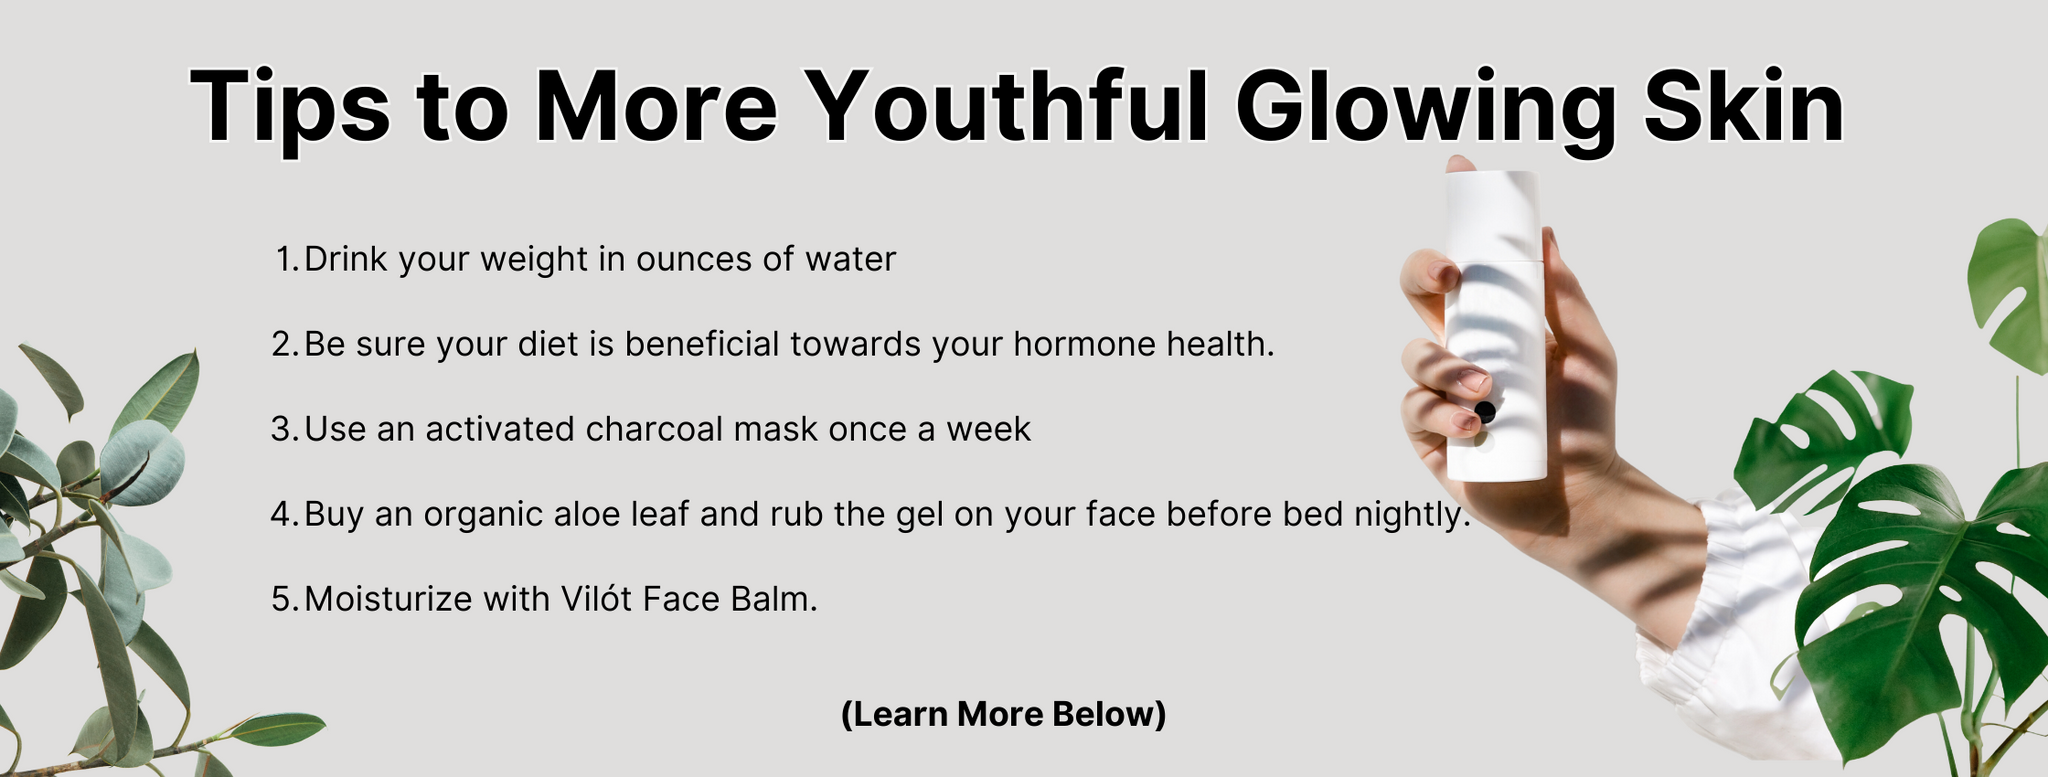 5 tips for youthful glowing skin for older women